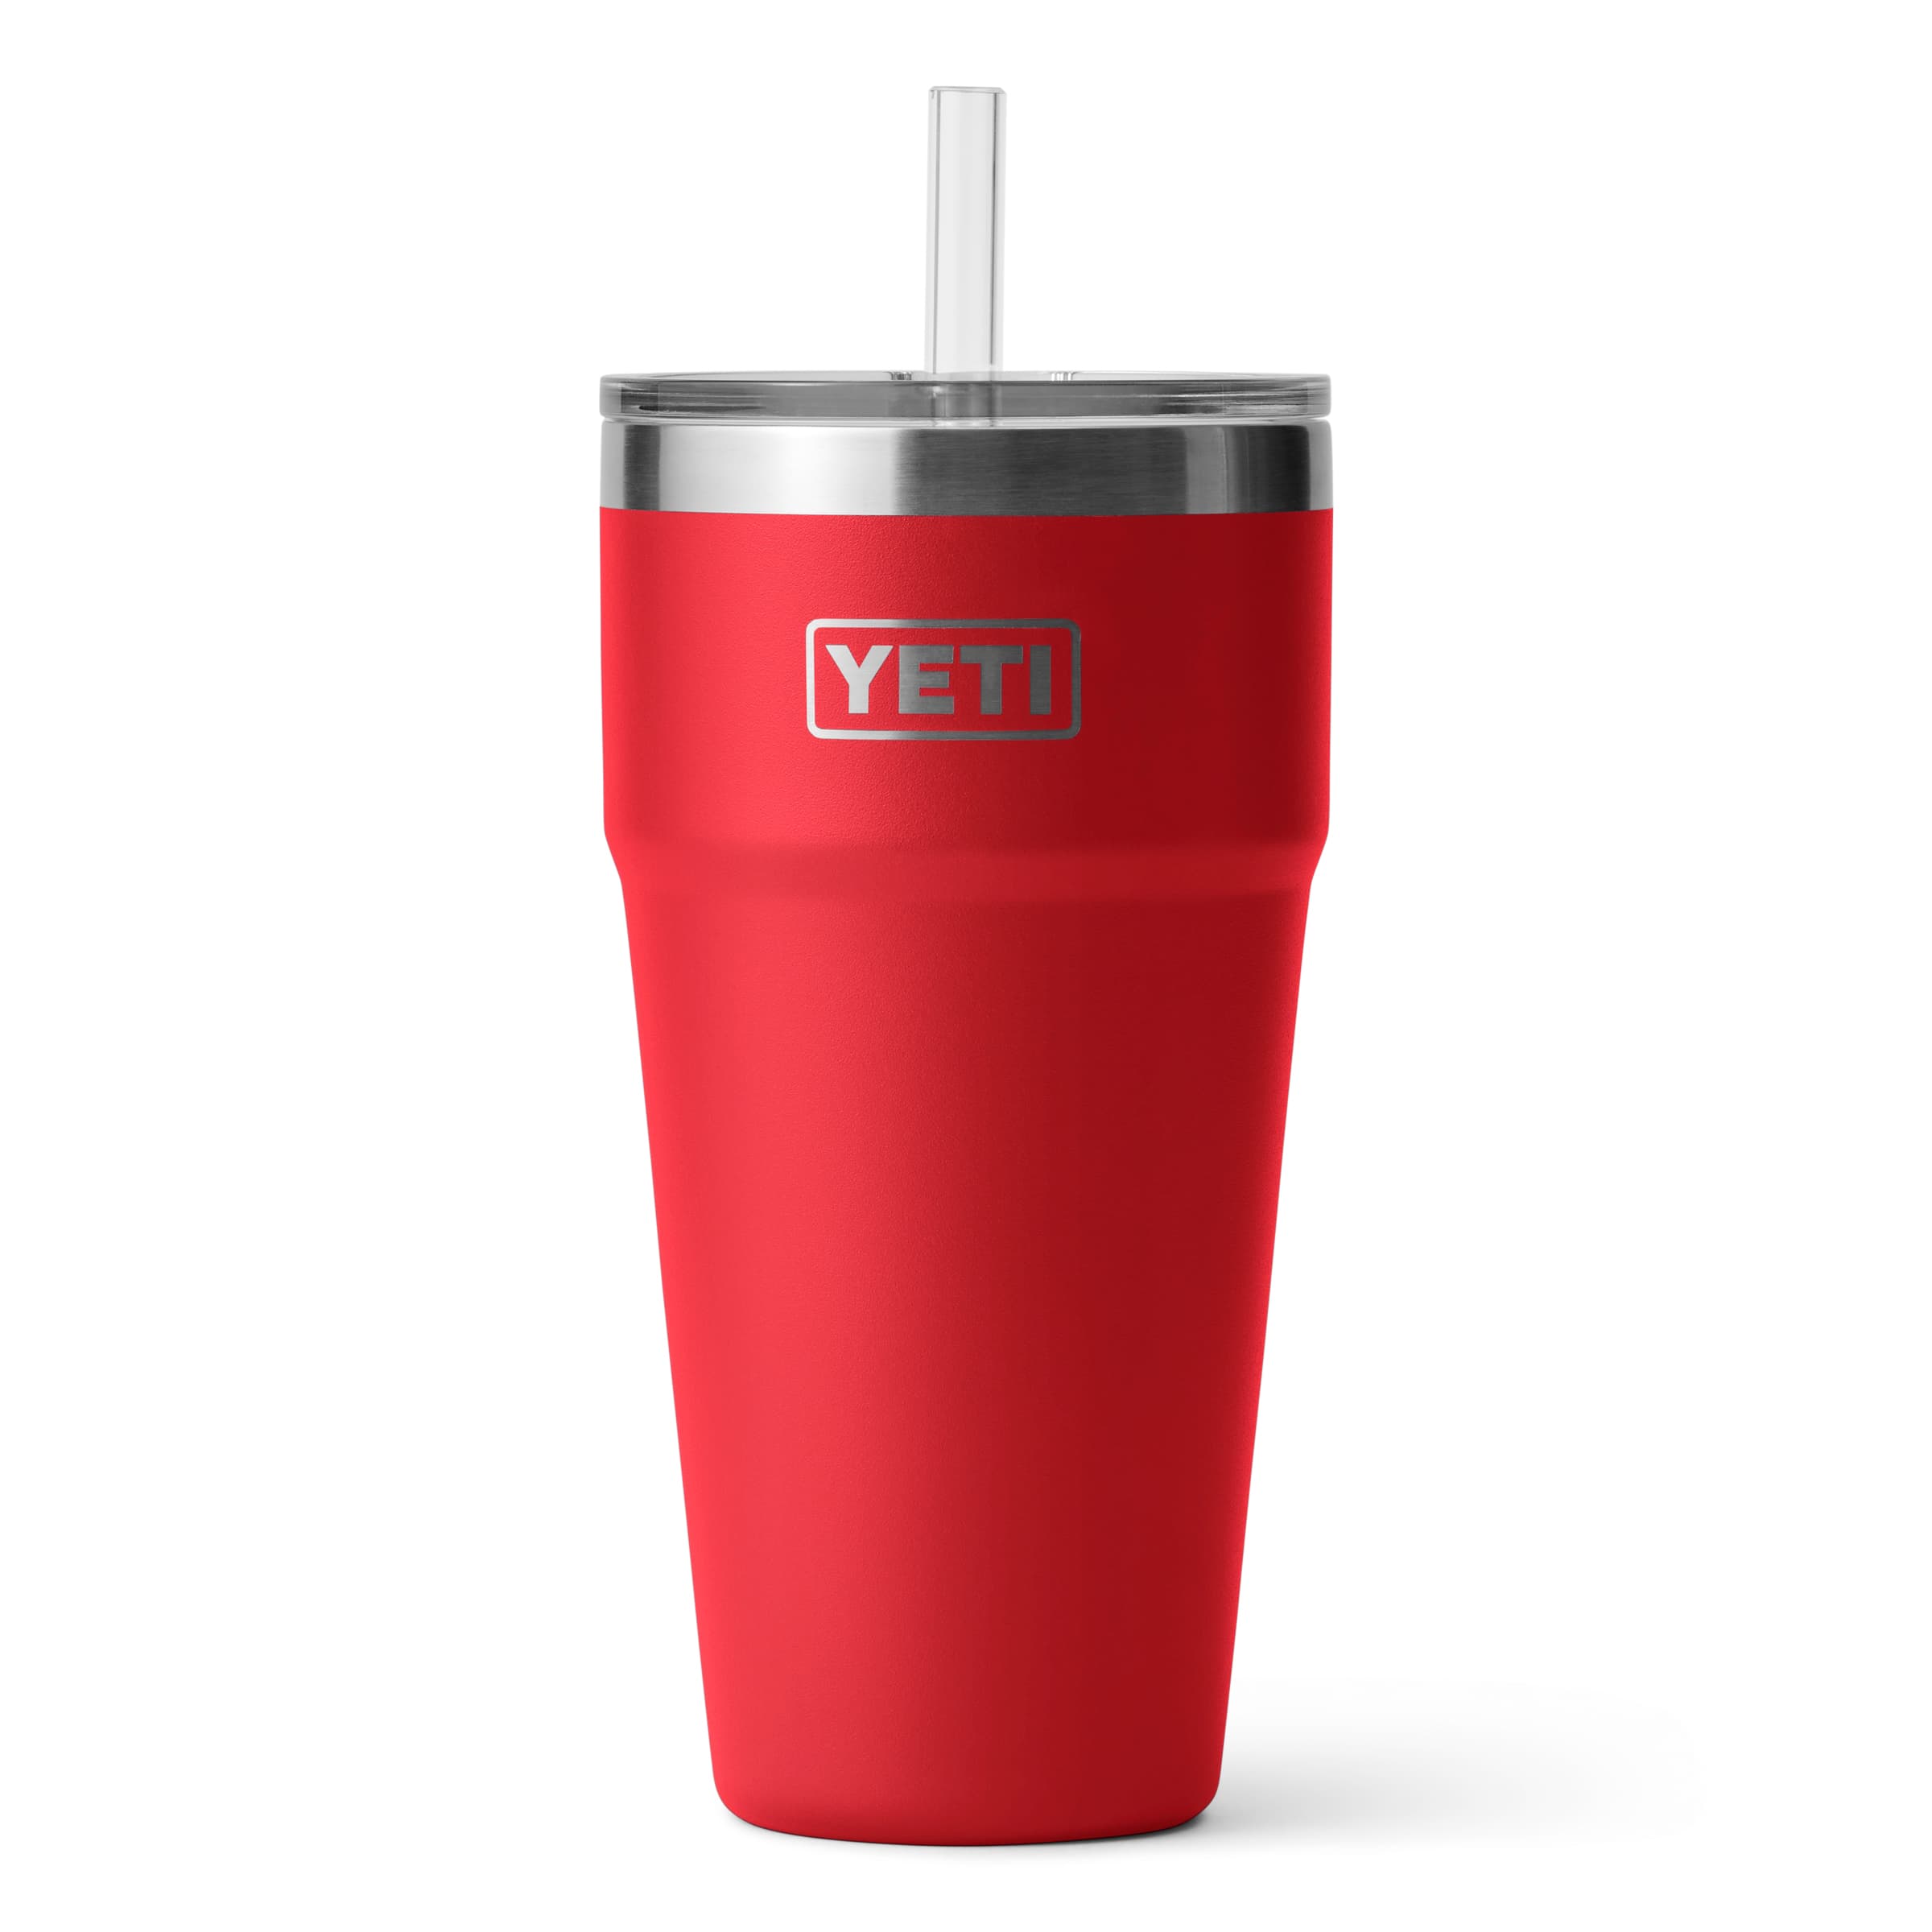 YETI® Rambler® 26 oz. Stackable Cup with Straw Lid